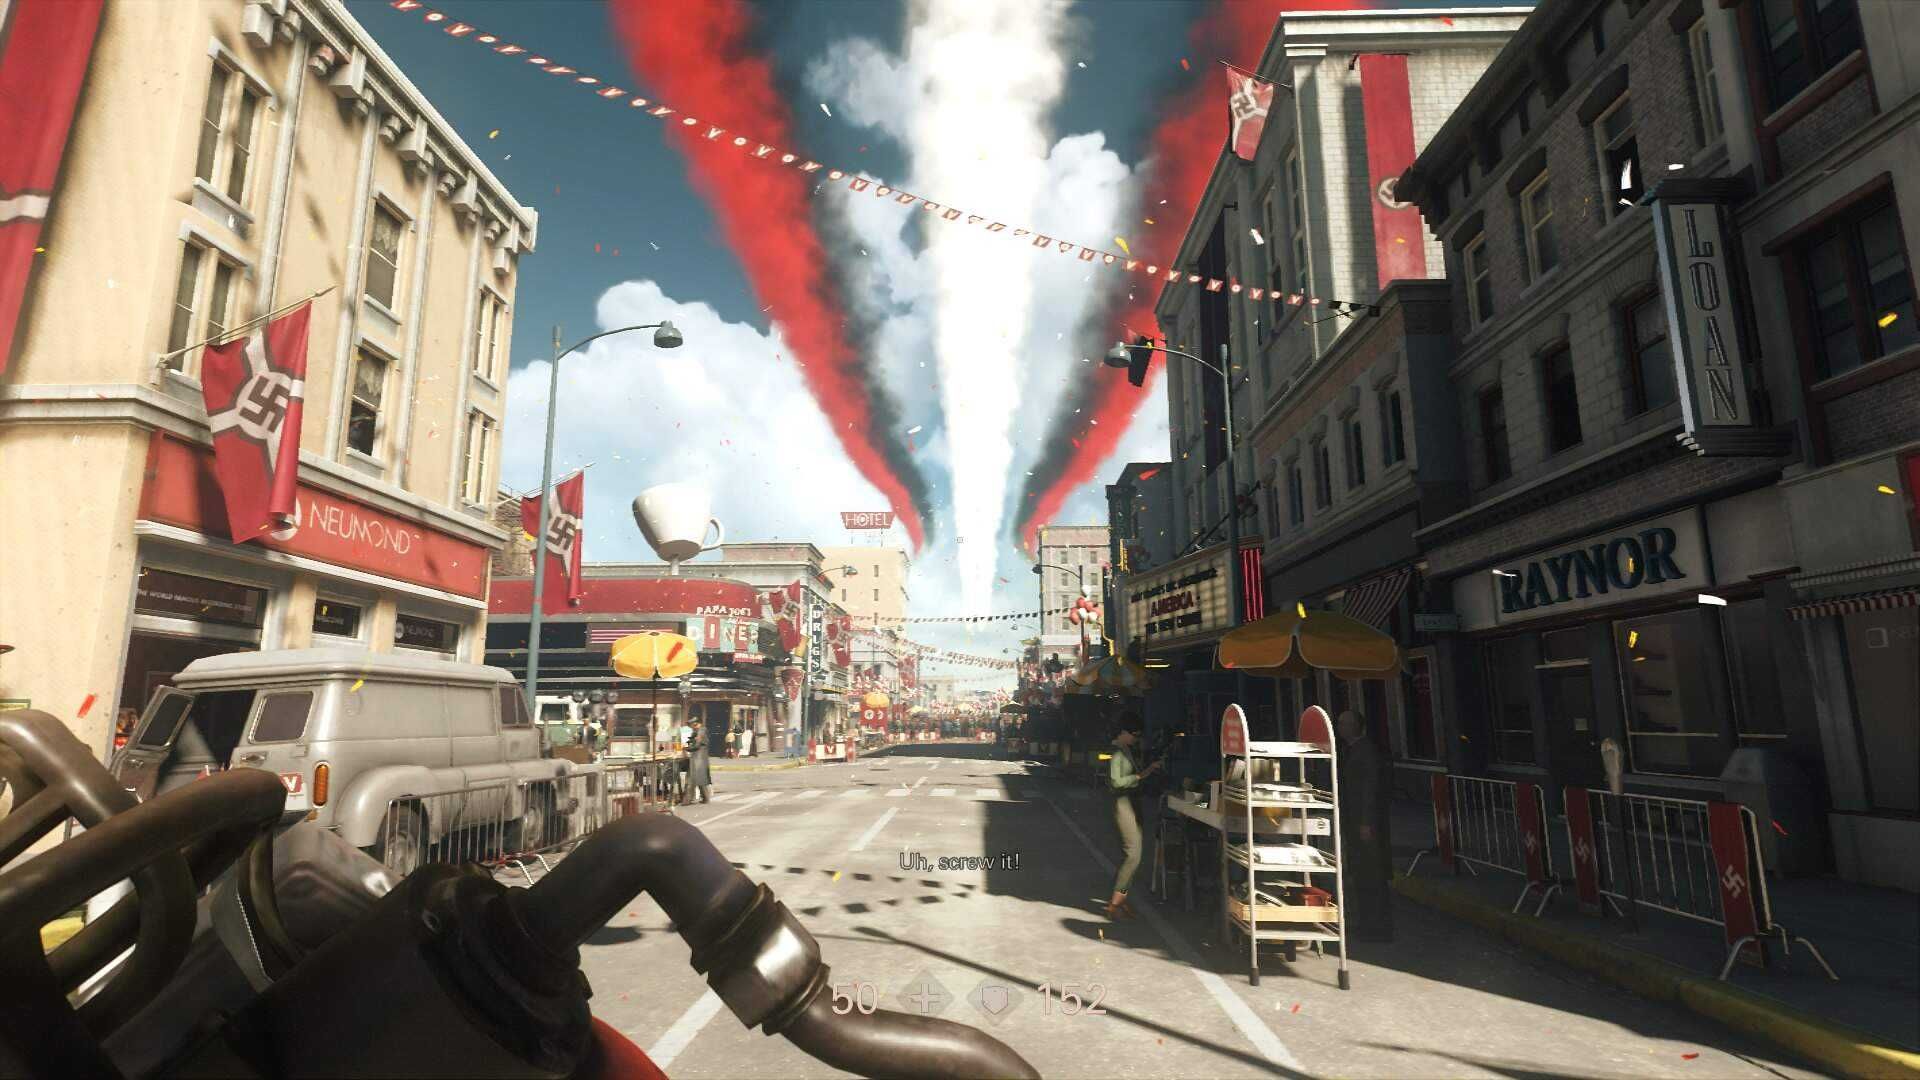 Wolfenstein 2: The New Colossus [Ps4]